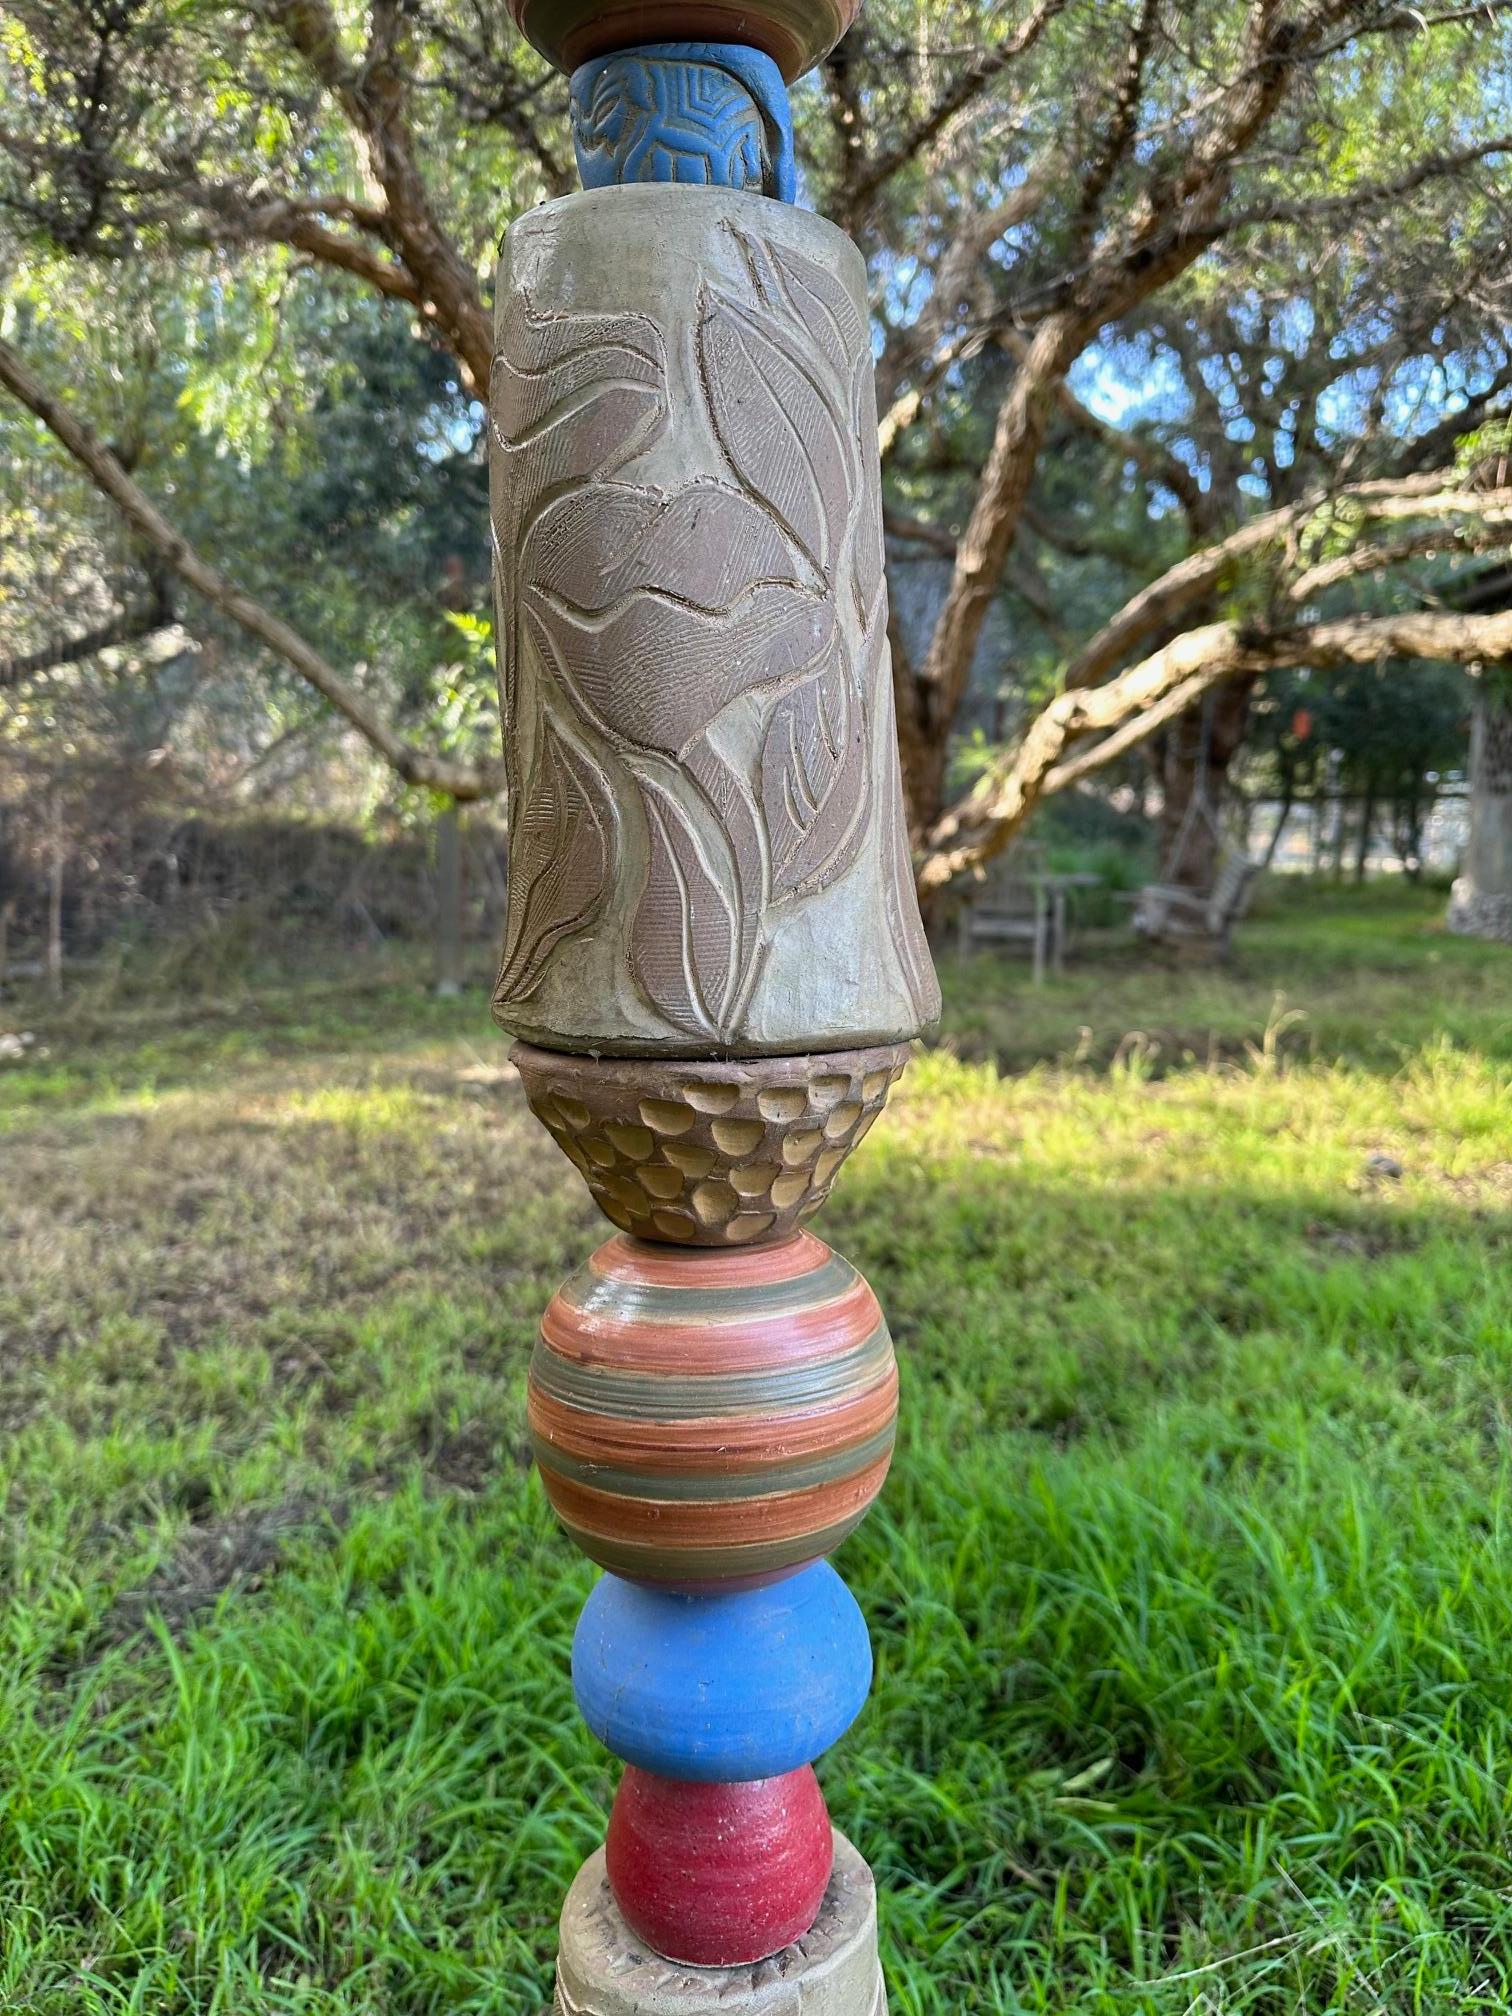 This masterpiece is exhibited in the Zimmerman Gallery, Carmel CA.

Please note: The base is not included. We will guide you through a simple installation process for outdoor or indoor placement.
--
